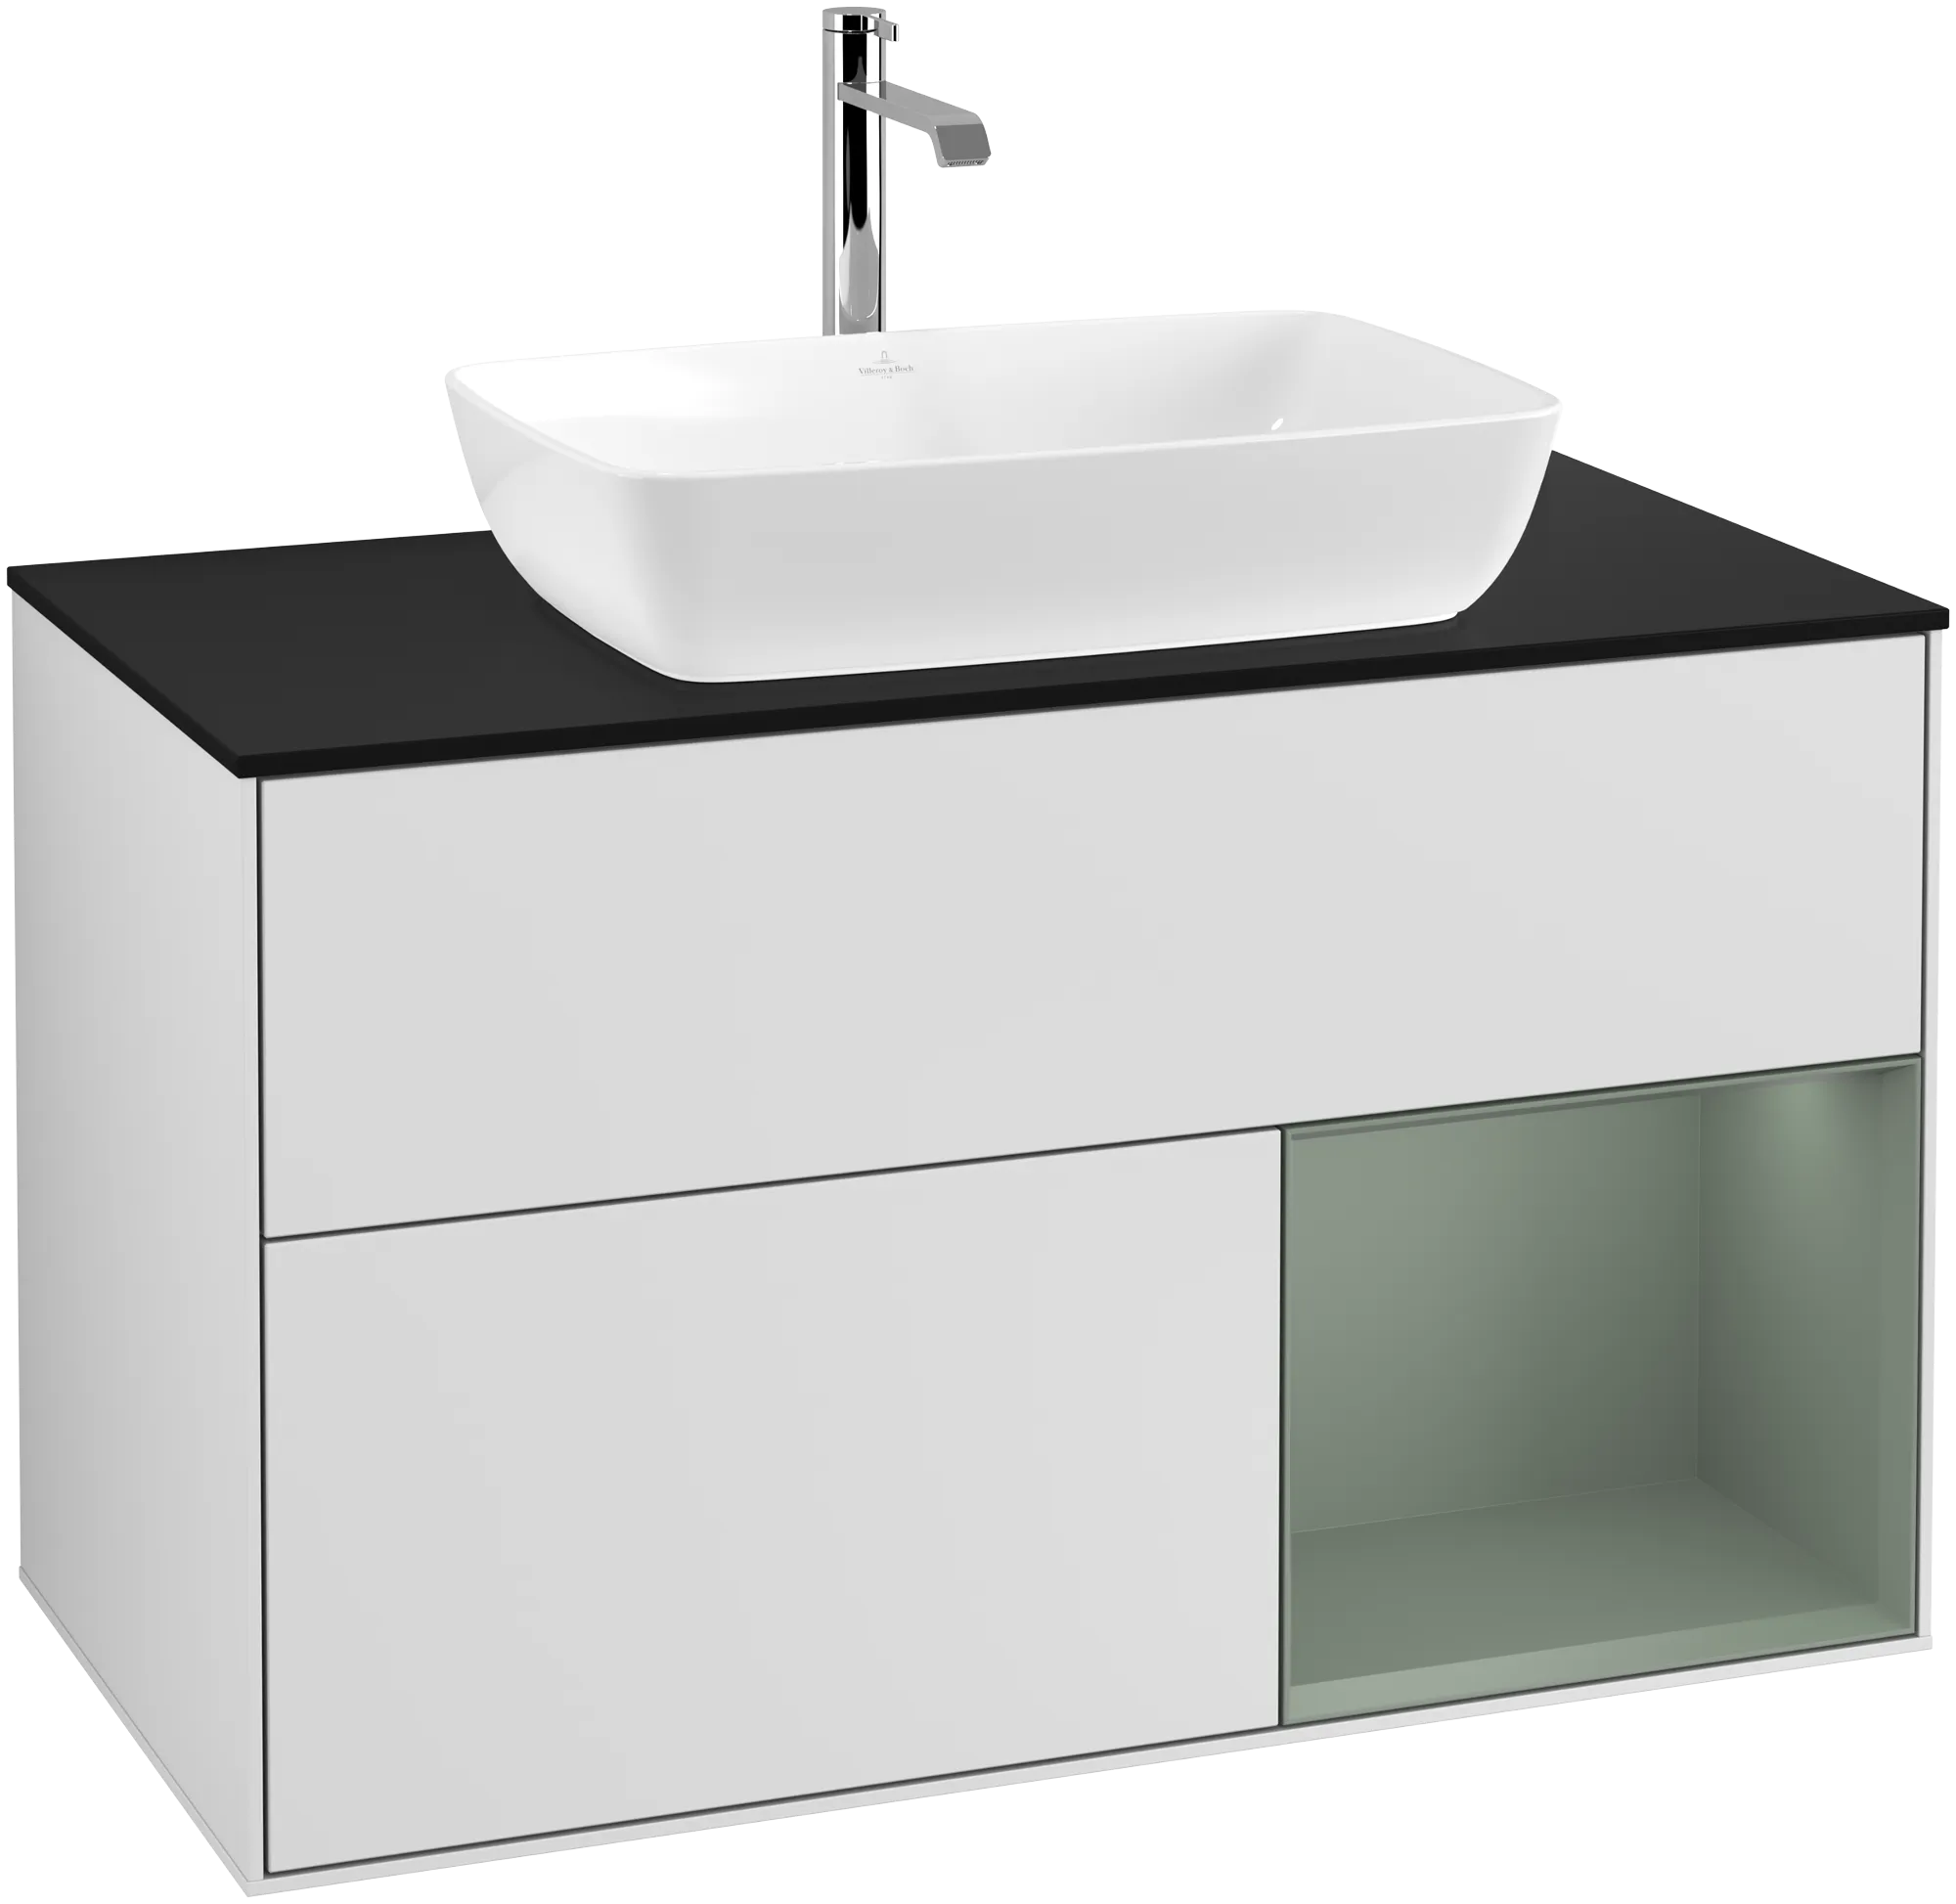 VILLEROY BOCH Finion Vanity unit, with lighting, 2 pull-out compartments, 1000 x 603 x 501 mm, White Matt Lacquer / Olive Matt Lacquer / Glass Black Matt #G782GMMT resmi